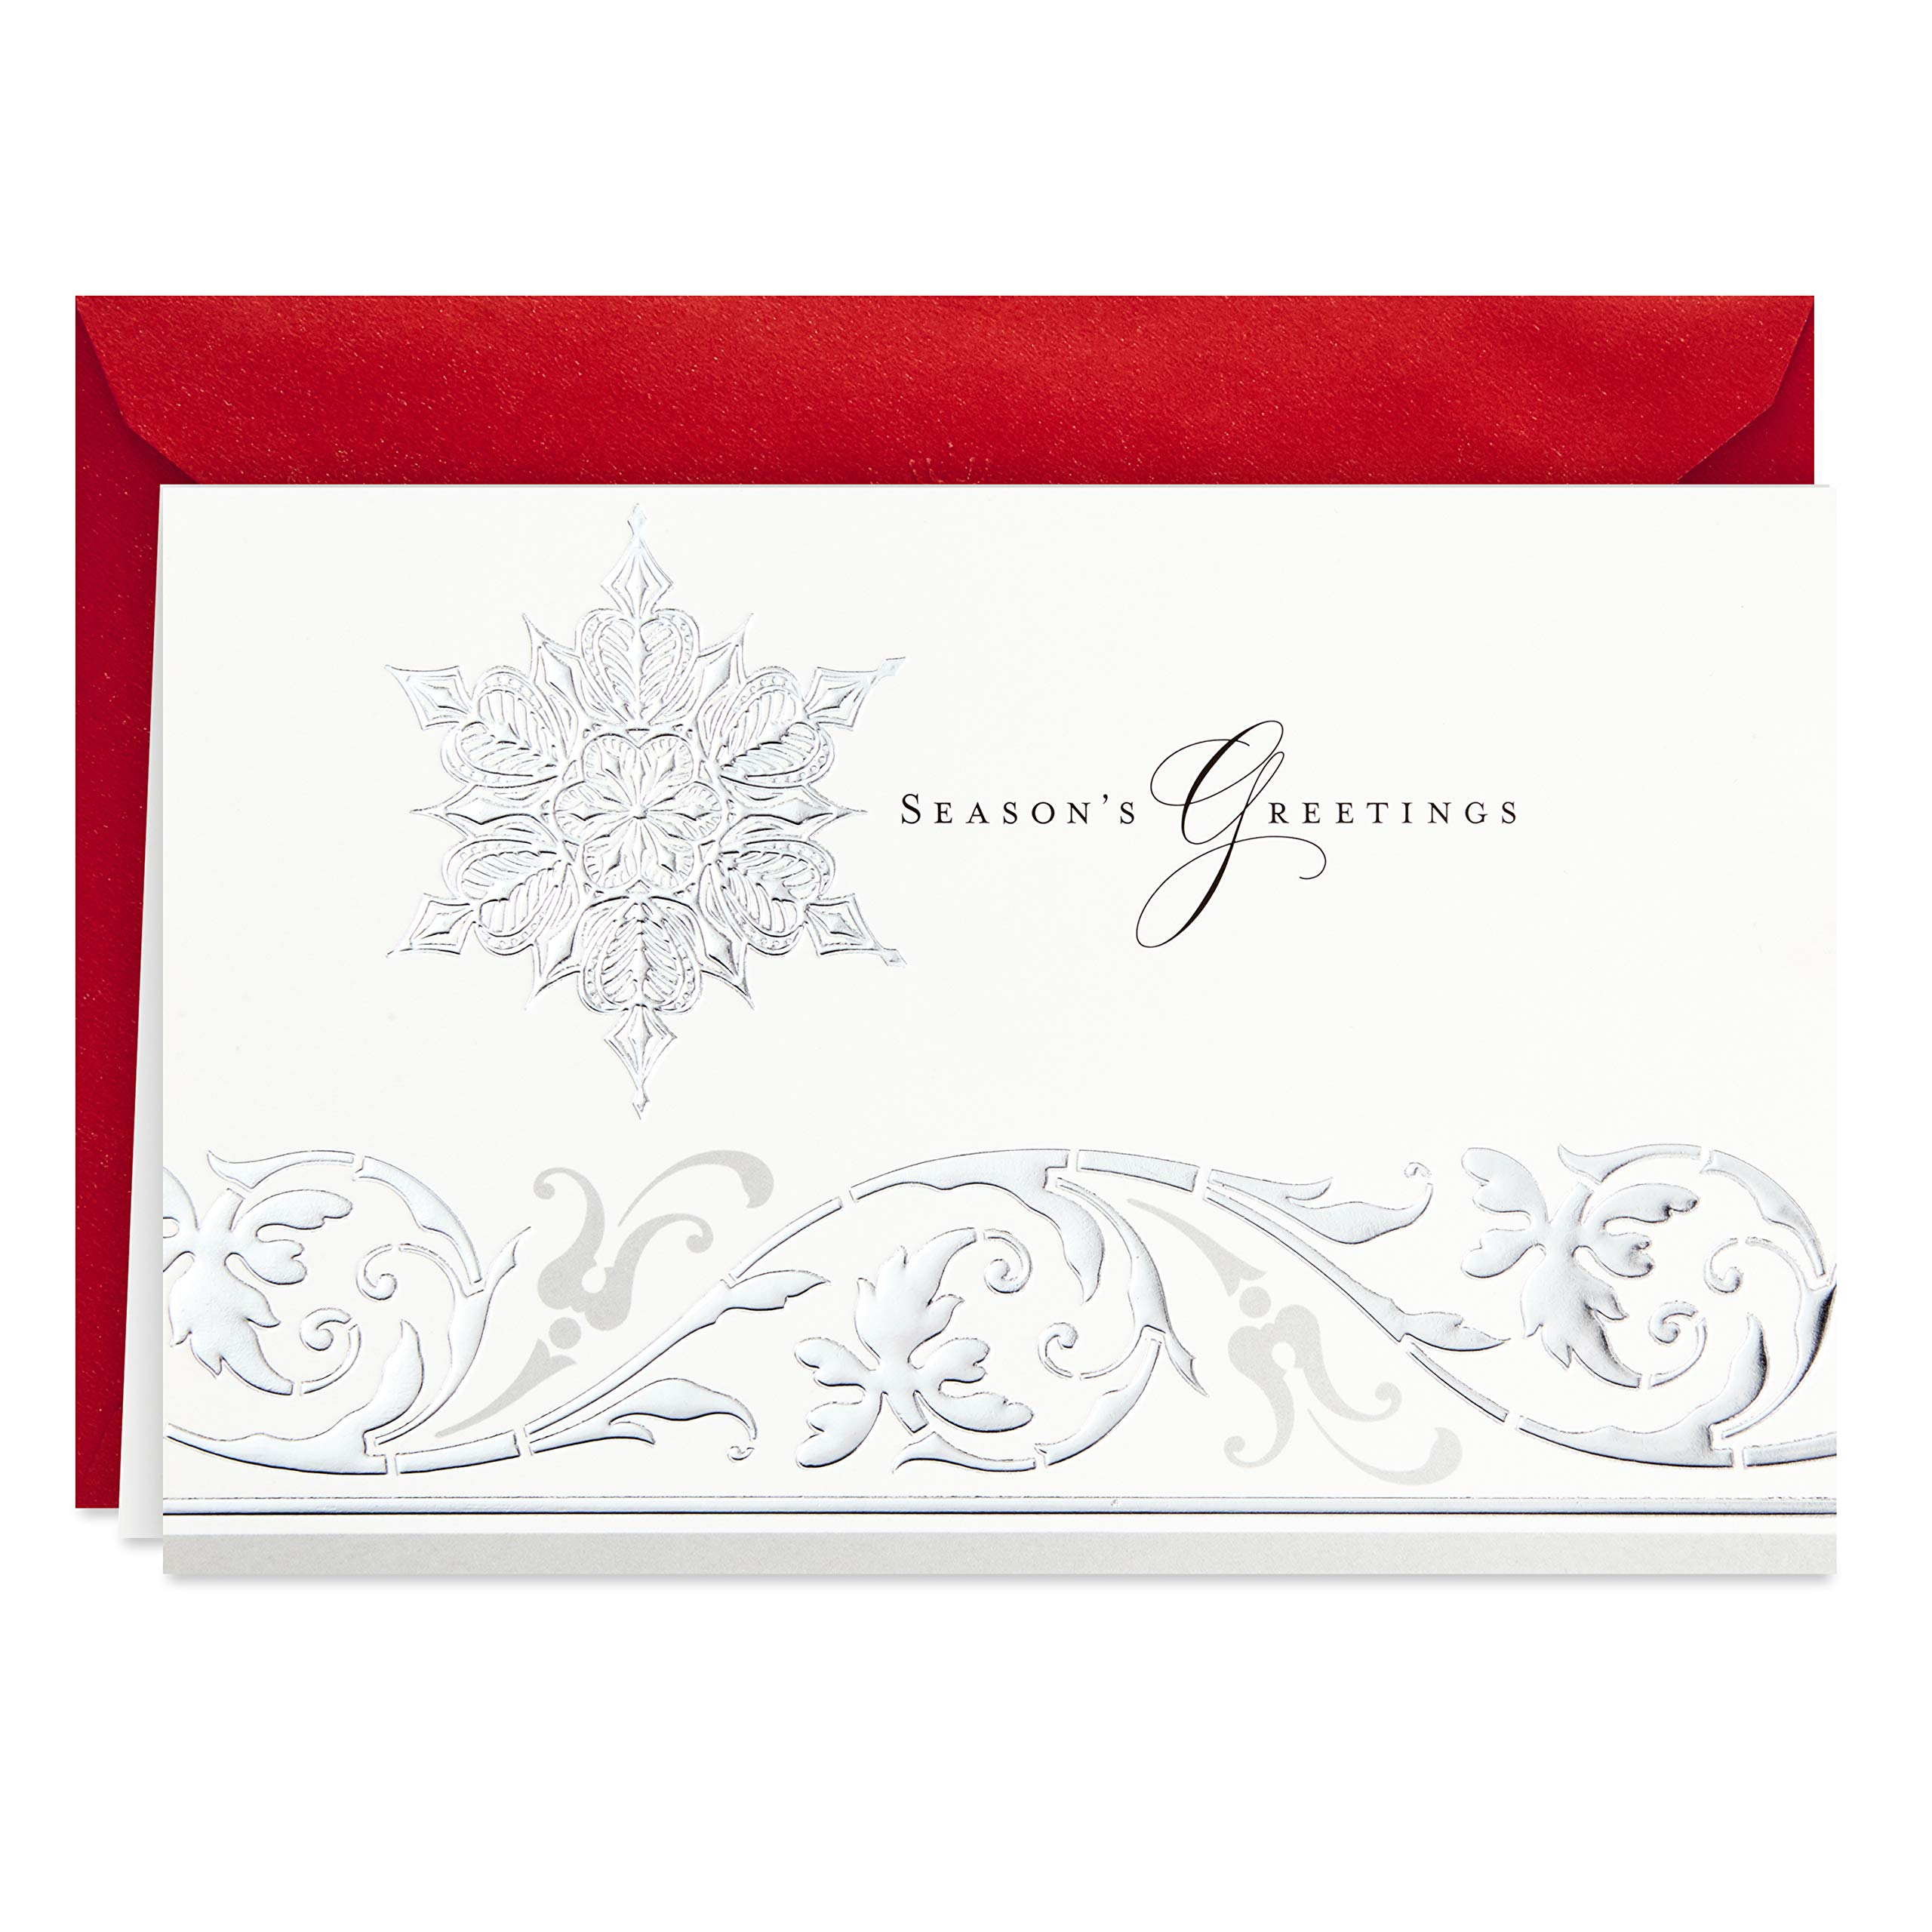 Hallmark Boxed Holiday Cards (Season's Greetings Snowflake, 40 Holiday Cards with Envelopes) (1XPX5667)